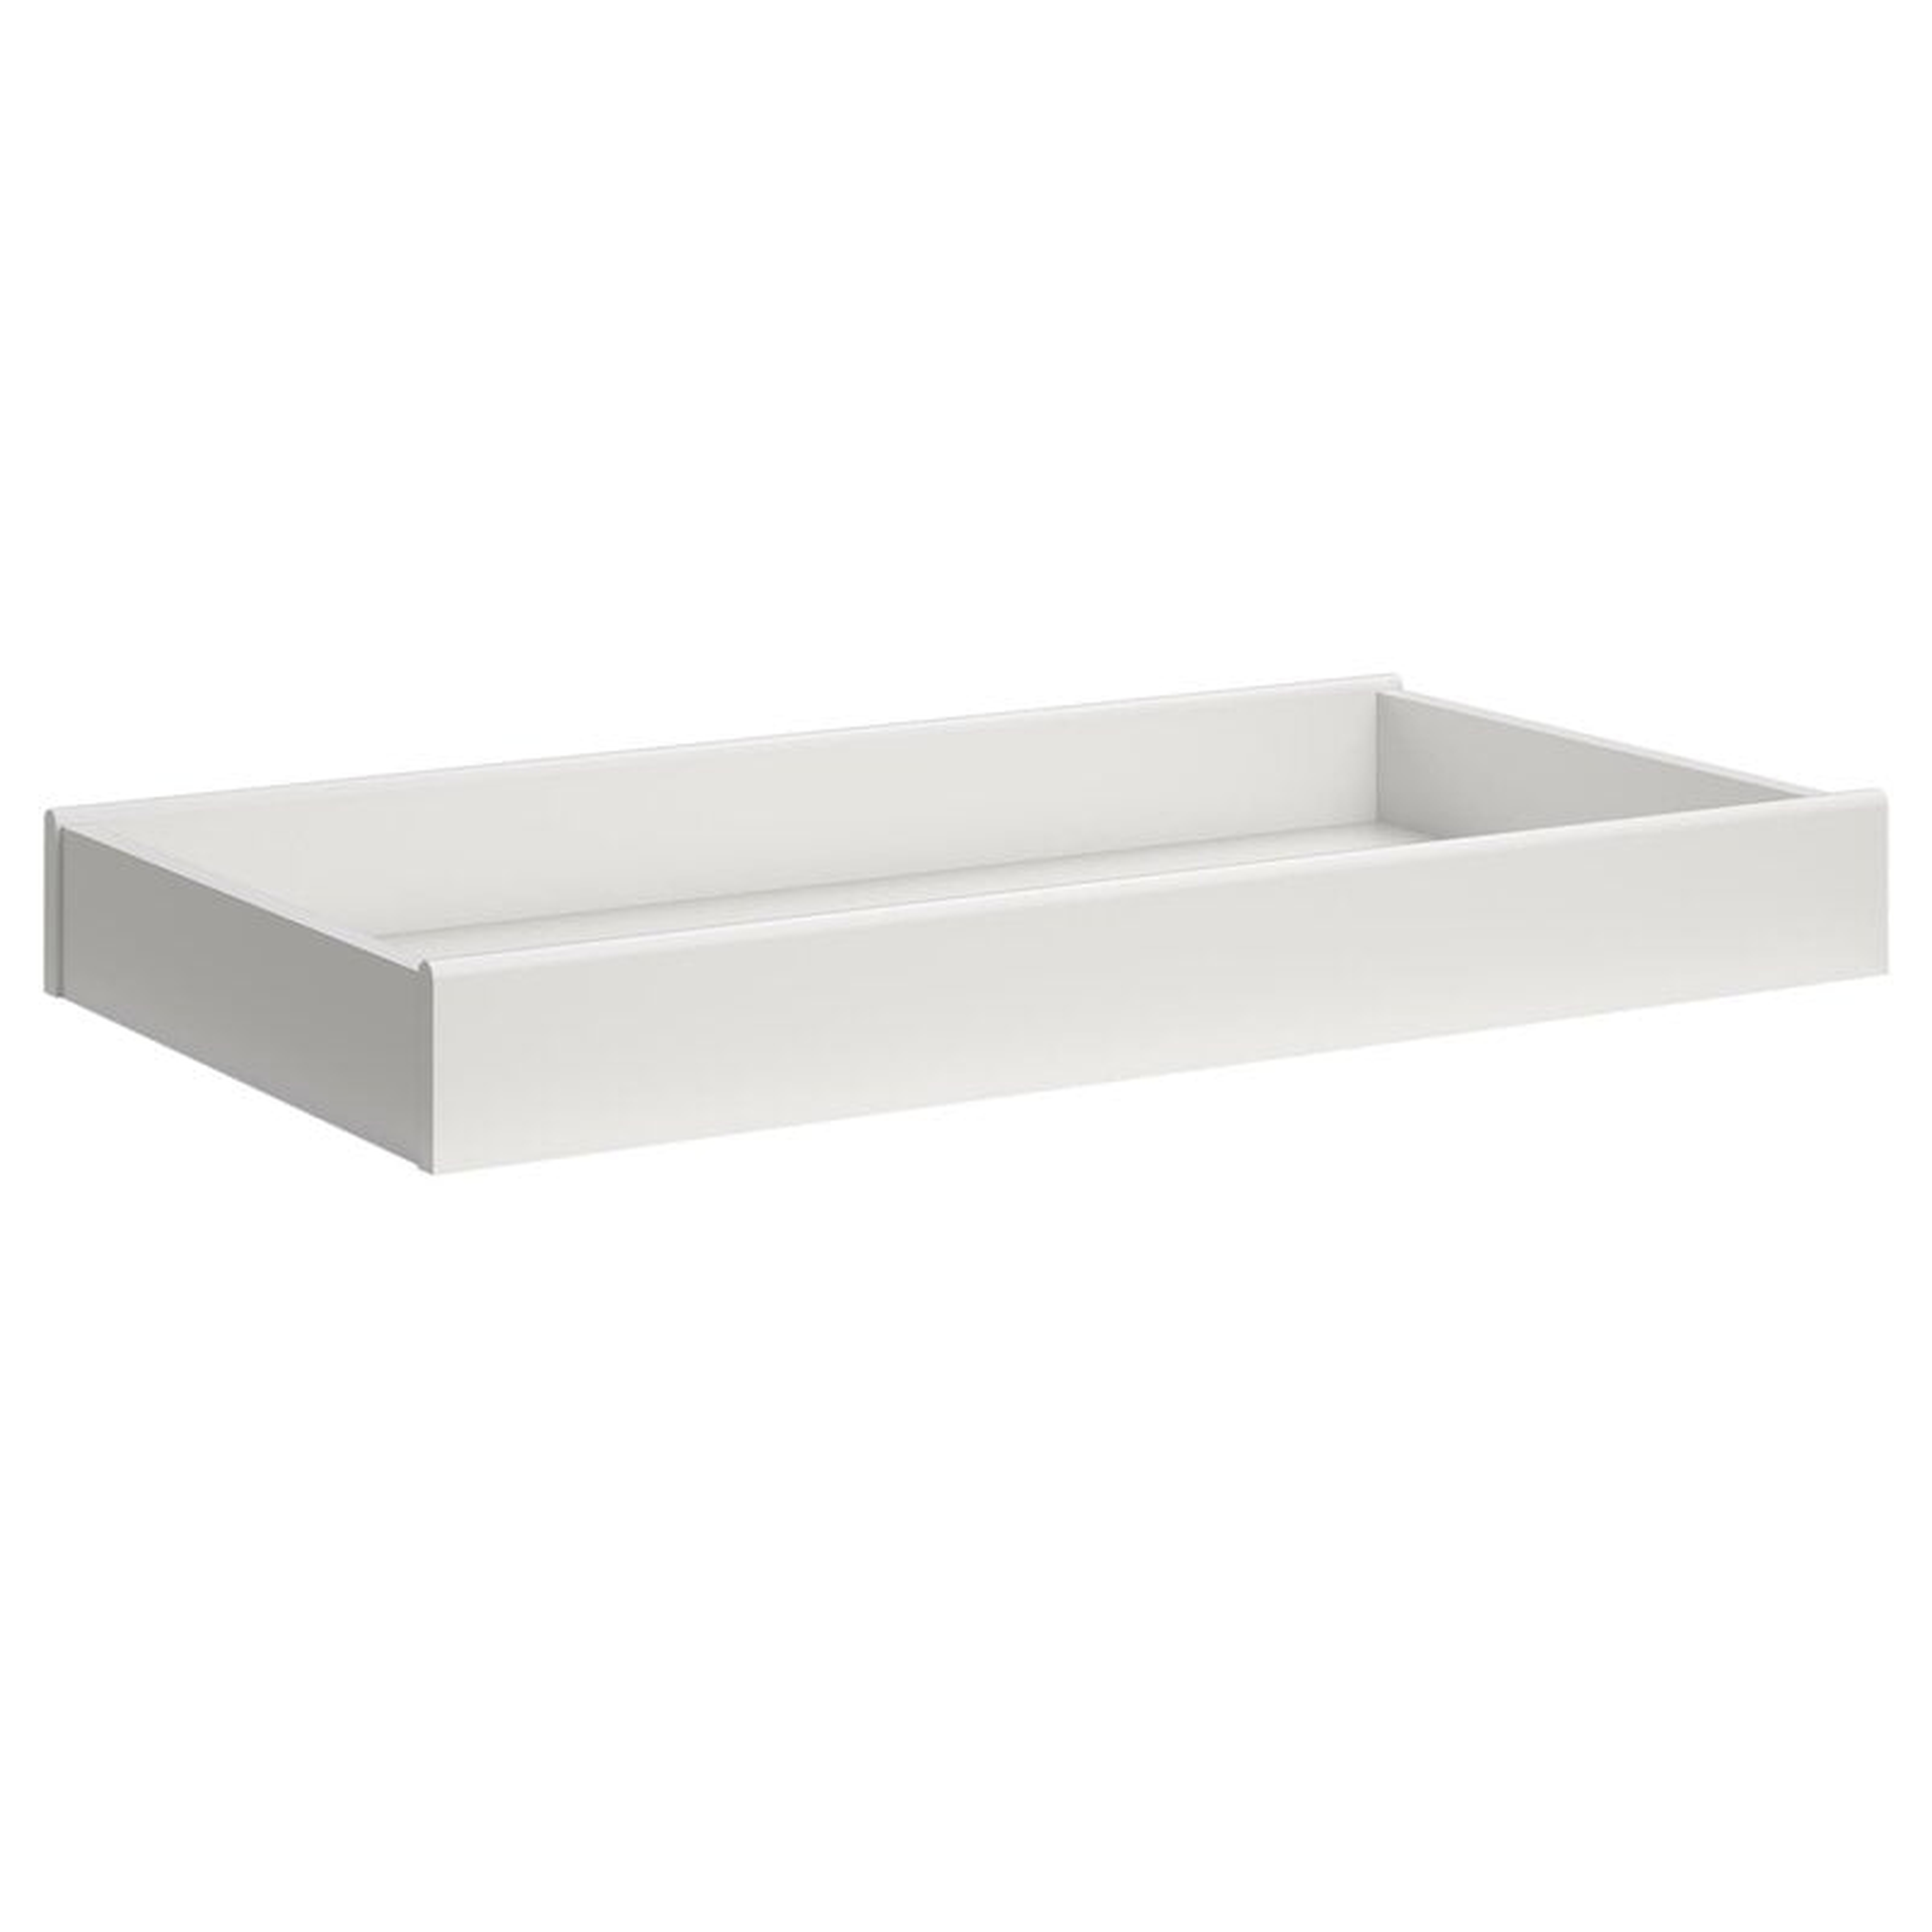 Topper Changing Tray - Wayfair